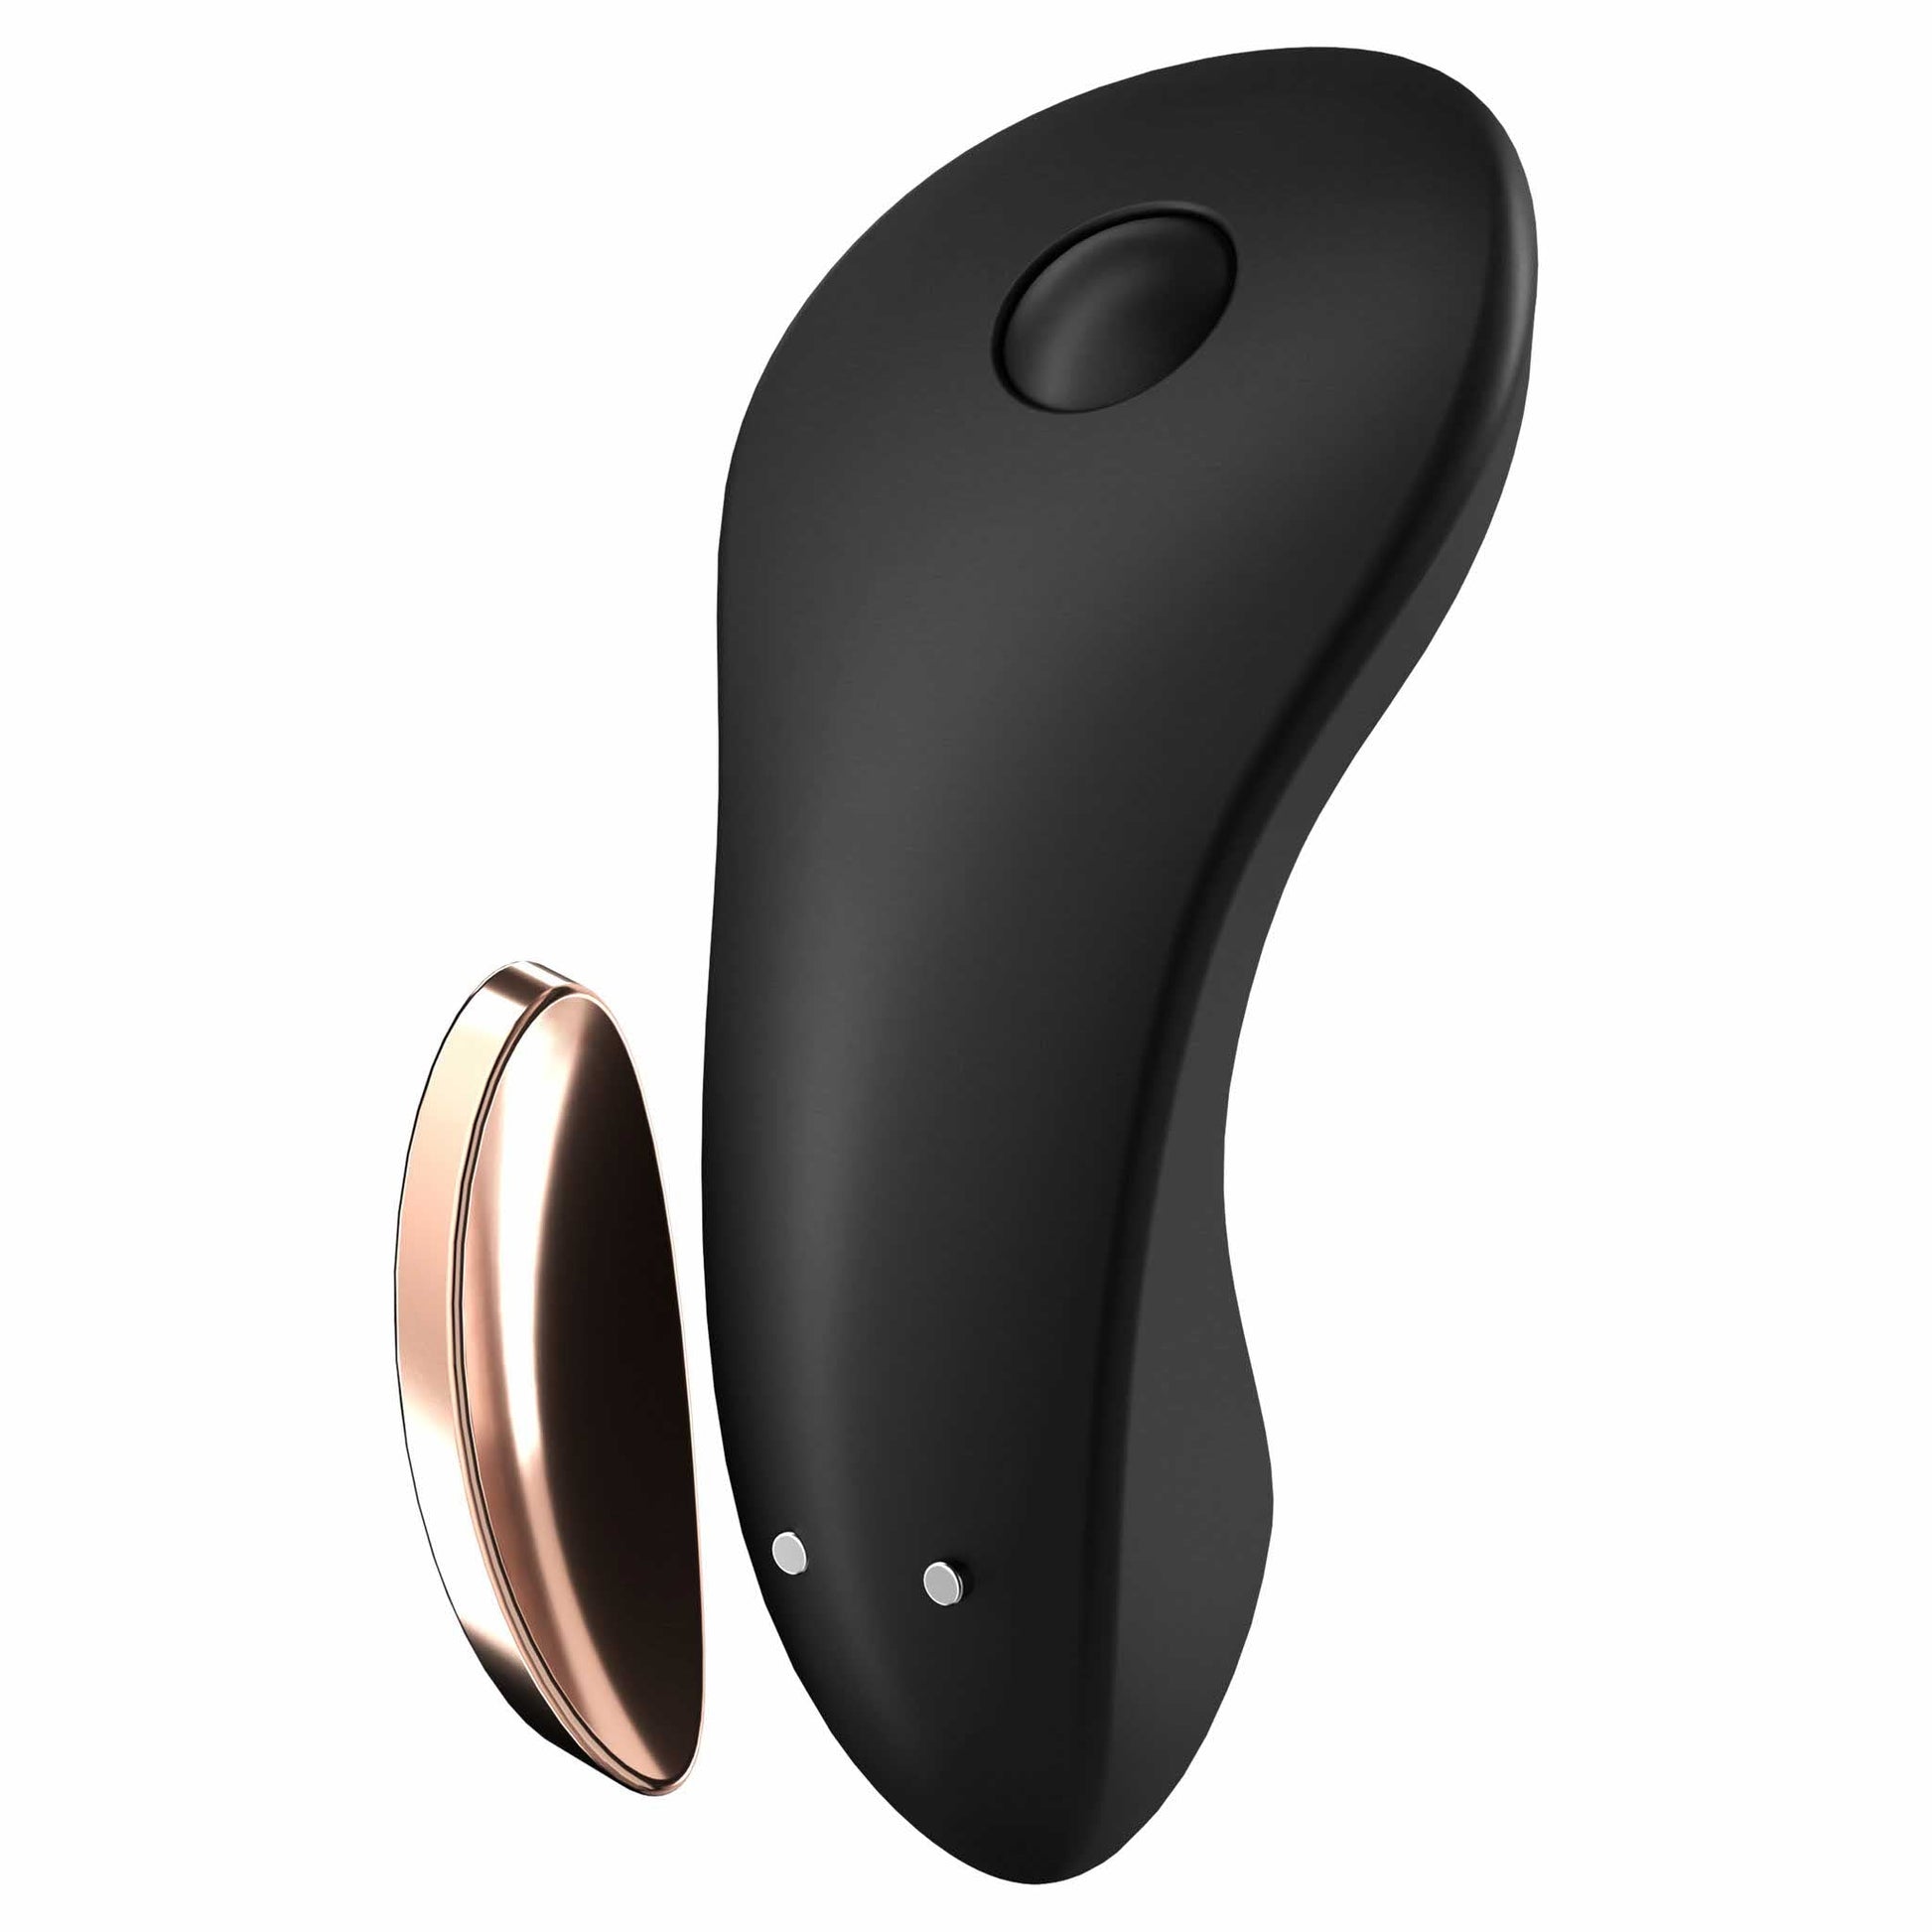 close-up of the charging of the satisfyer little secret remote control panty vibrator sw10116 black